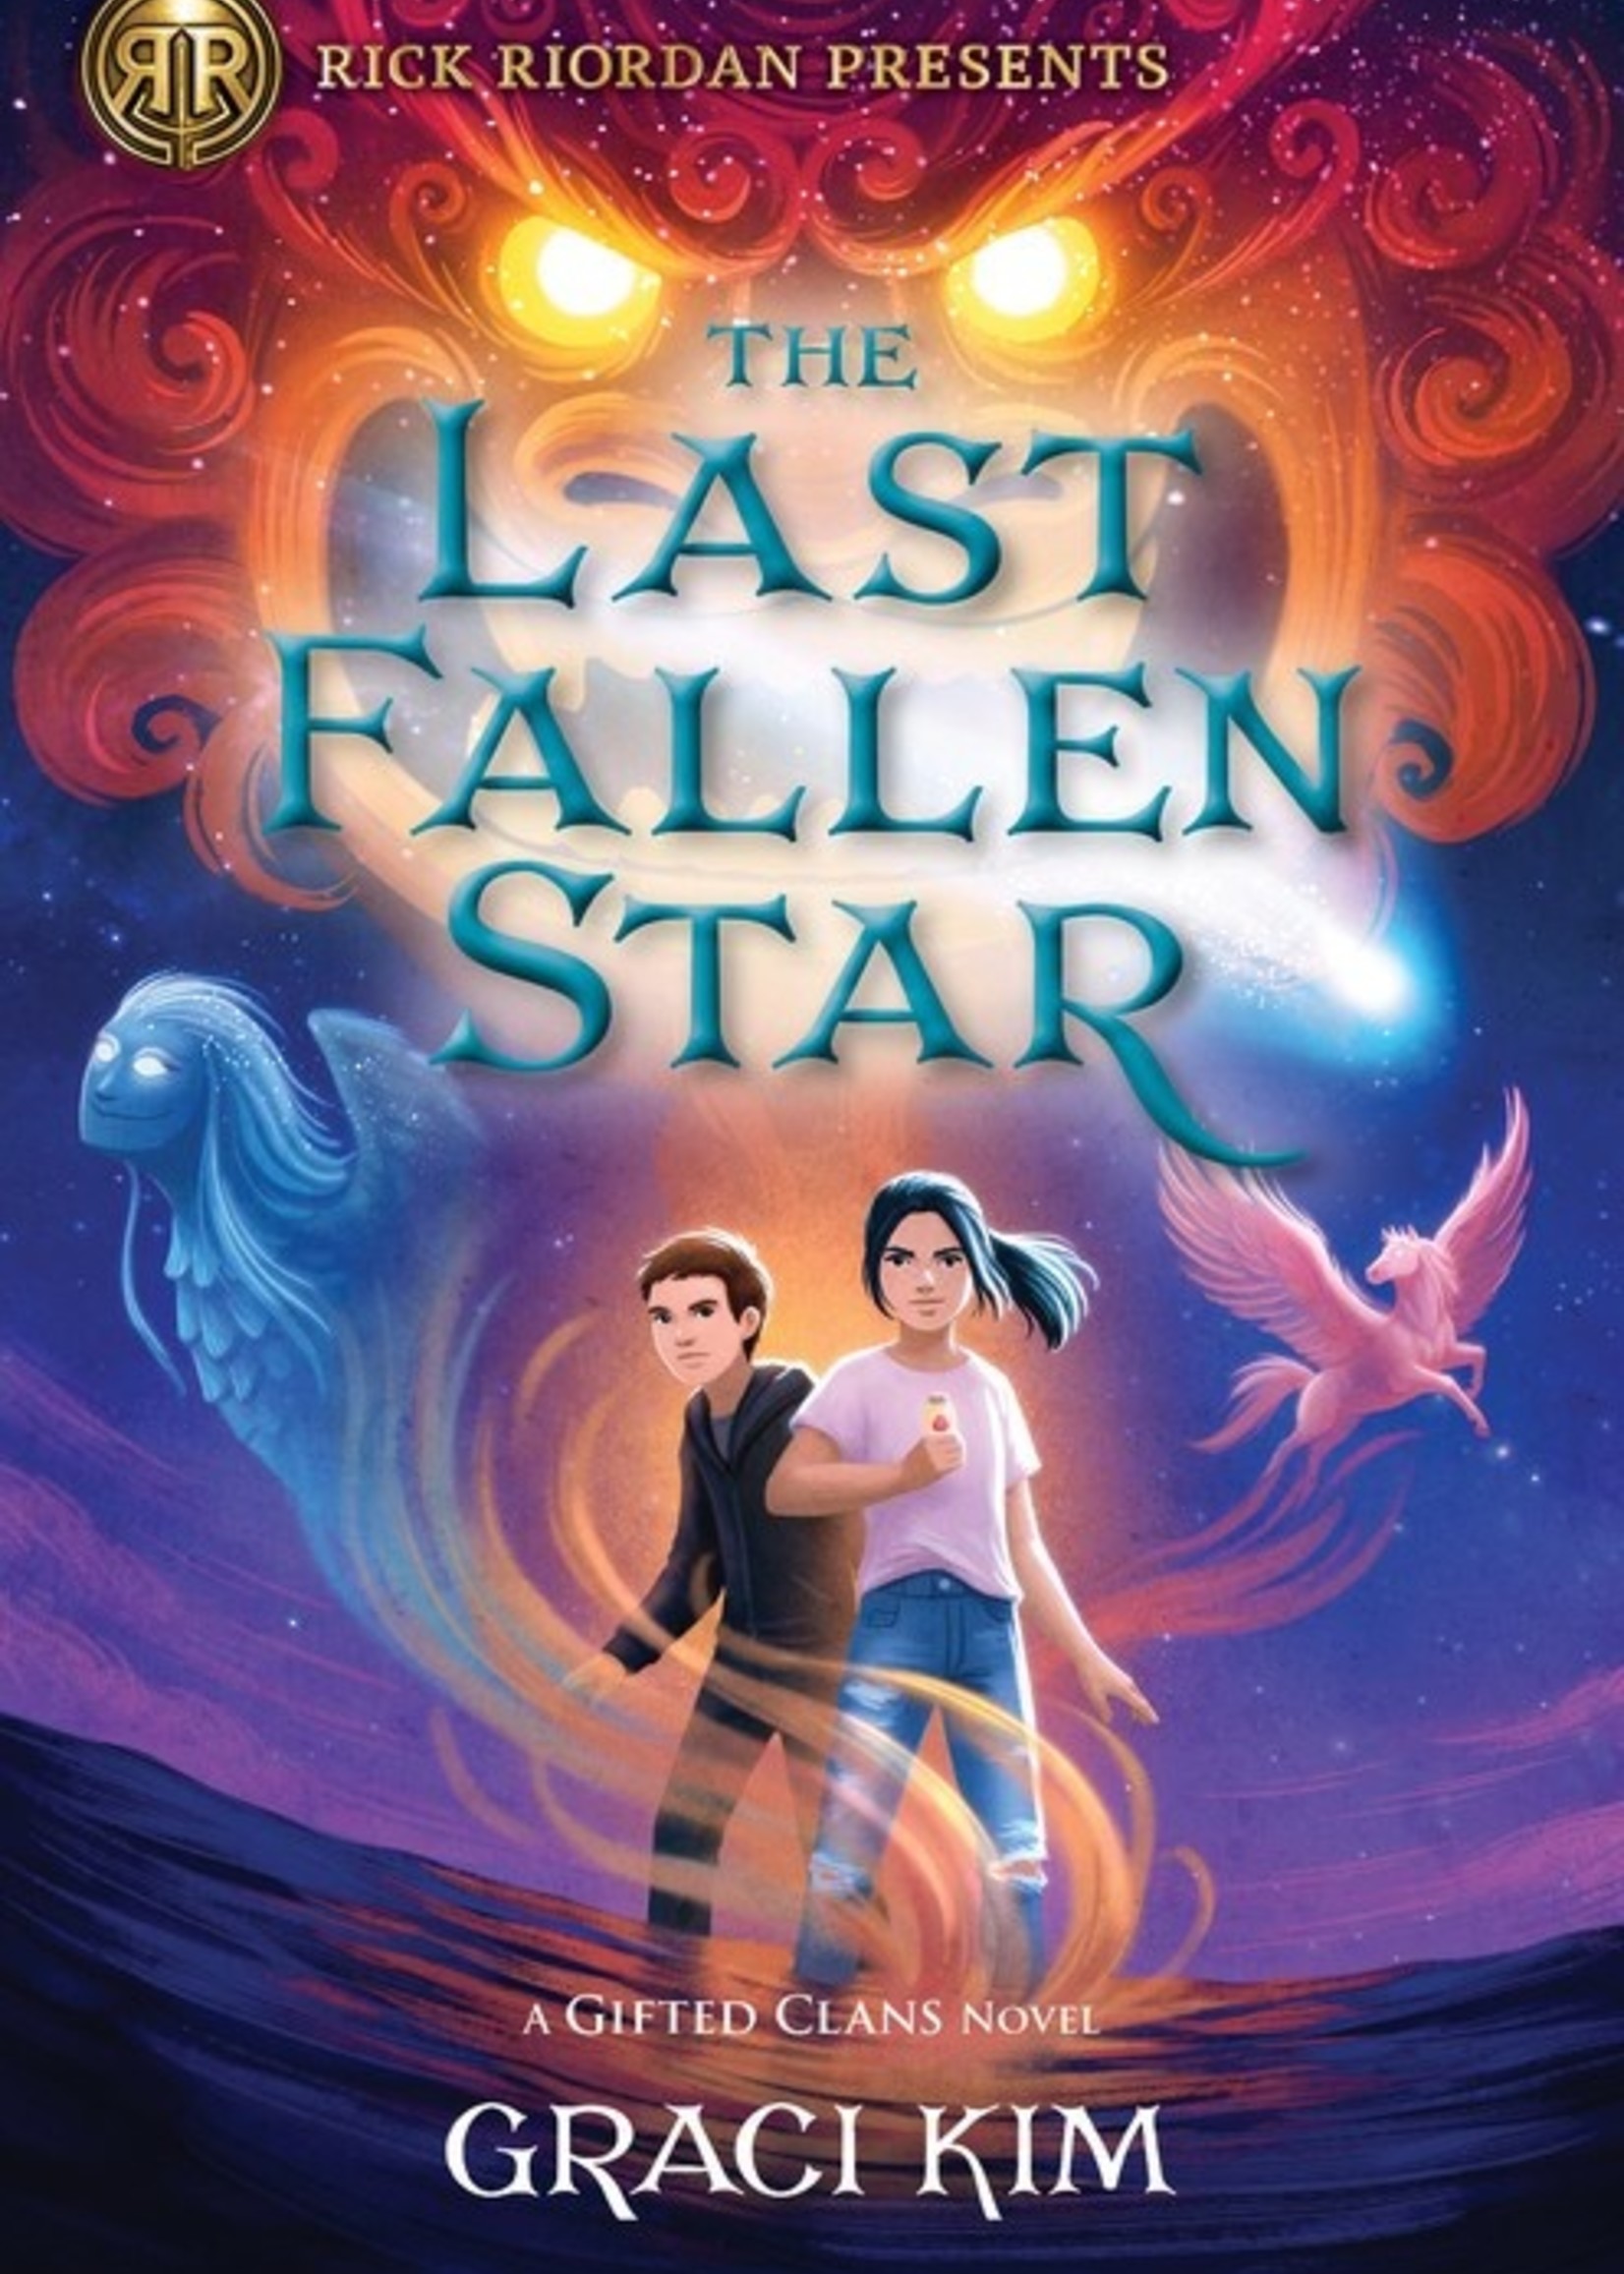 Rick Riordan Presents: Gifted Clans #01, The Last Fallen Star - Paperback